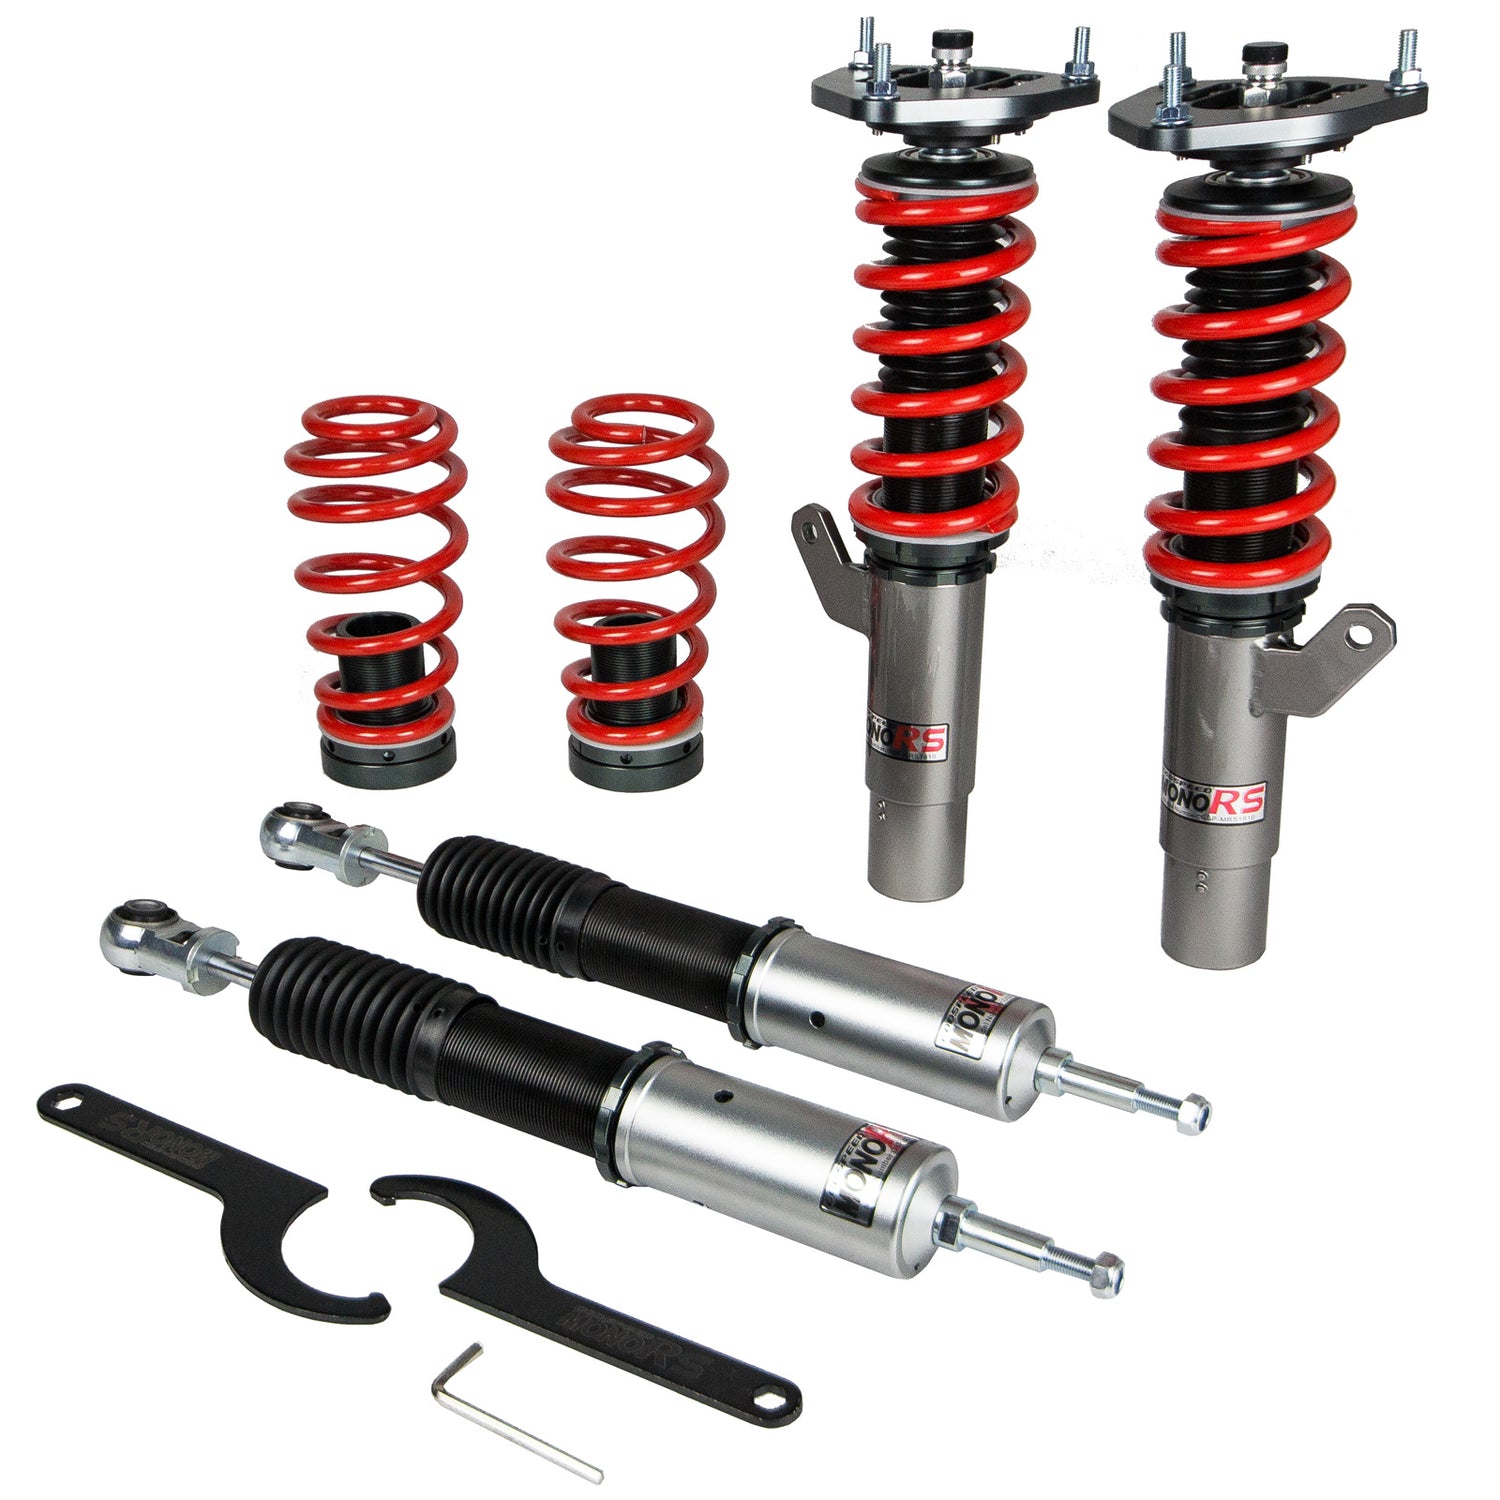 Godspeed MRS1810-D MonoRS Coilover Lowering Kit, 32 Damping Adjustment, Ride Height Adjustable